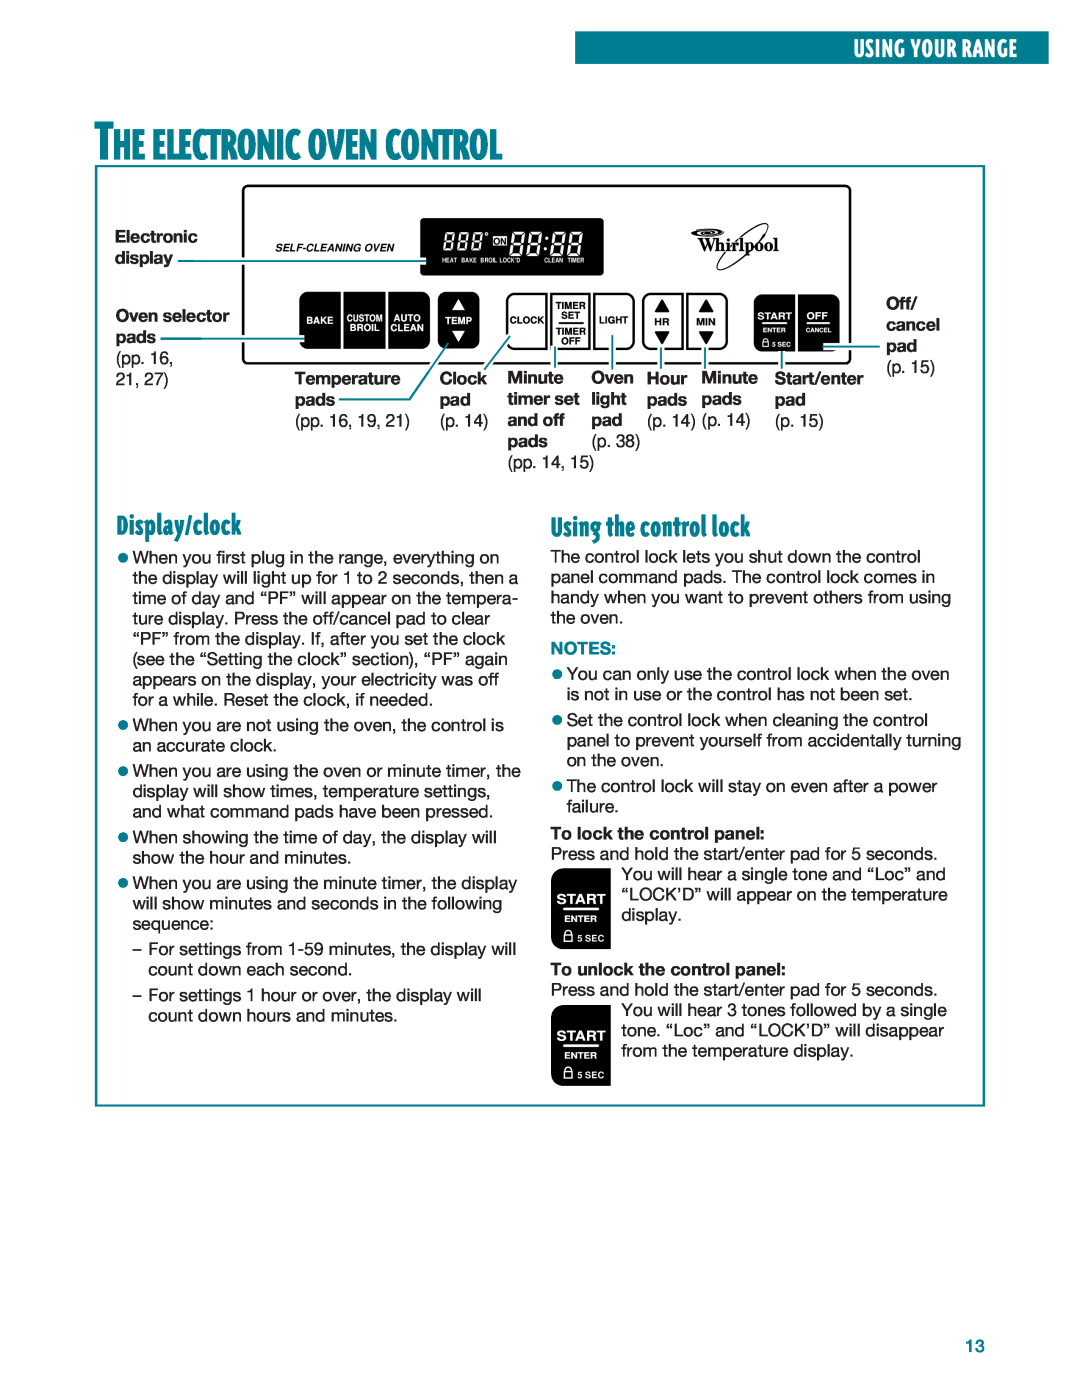 Whirlpool RF385PXE, RF386PXE The Electronic Oven Control, Display/clock, Using the control lock, Using Your Range, p. 14 p 